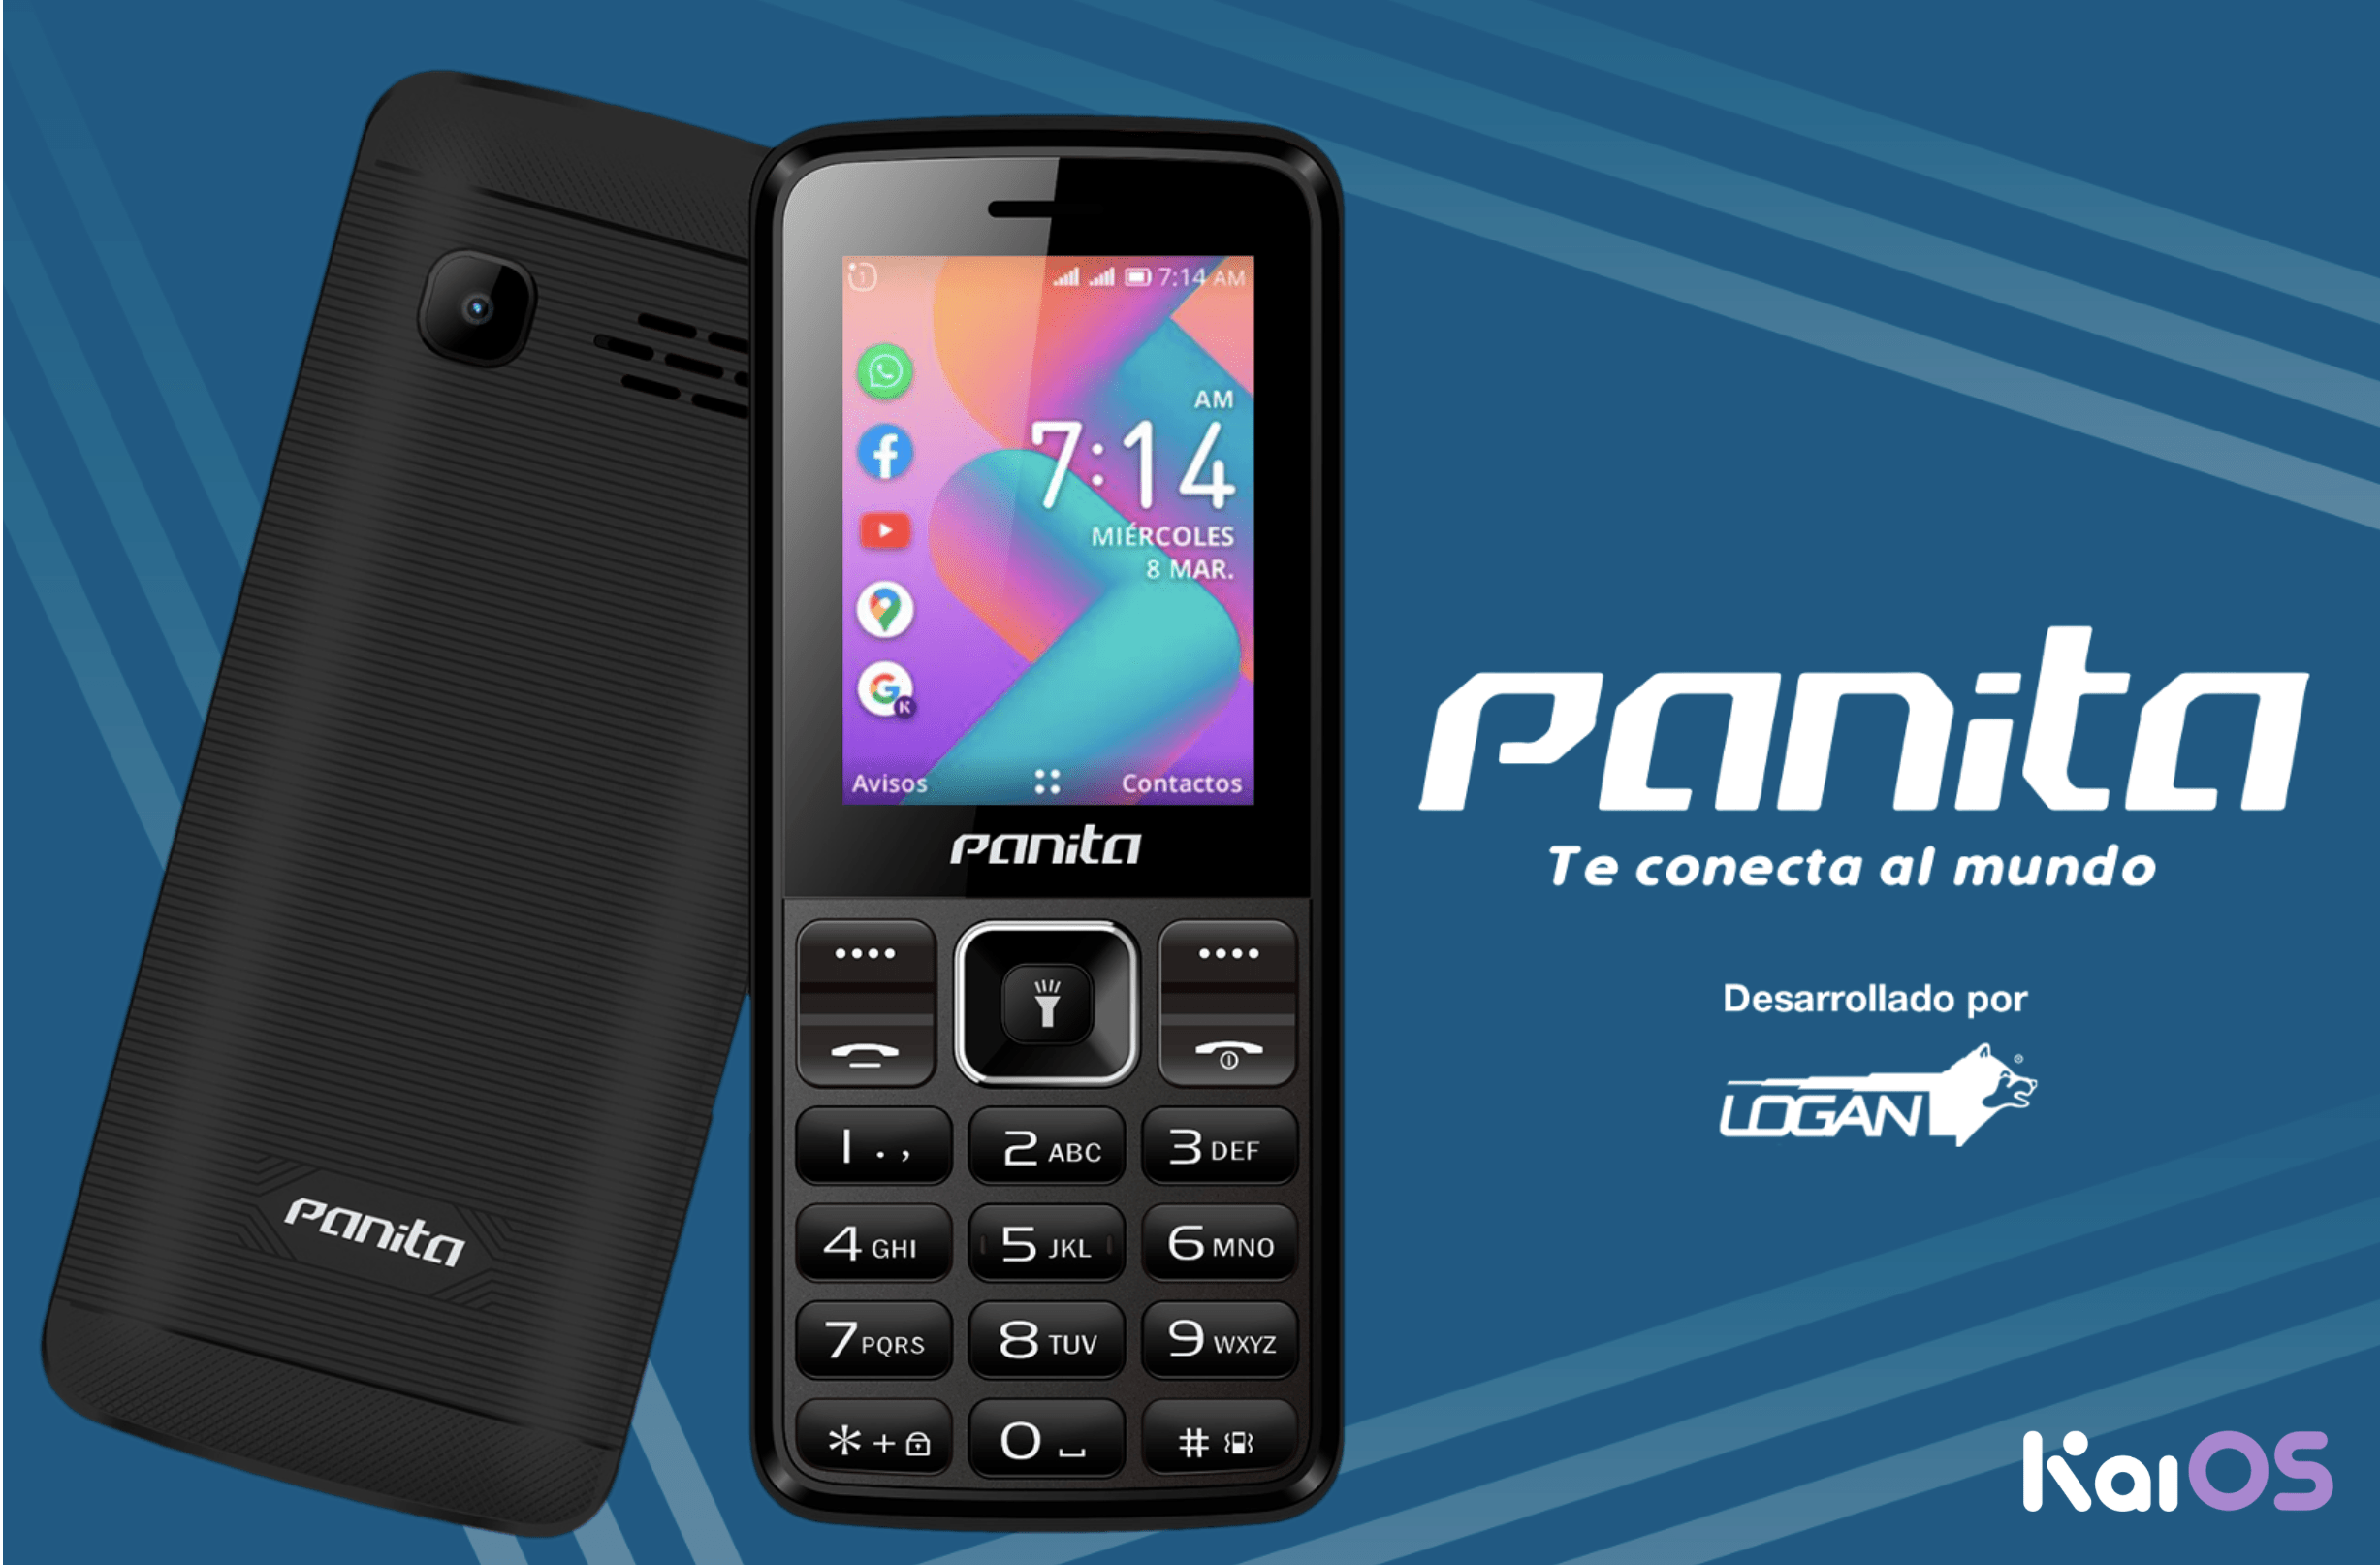 Introducing Panita: the smart feature phone by Logan!